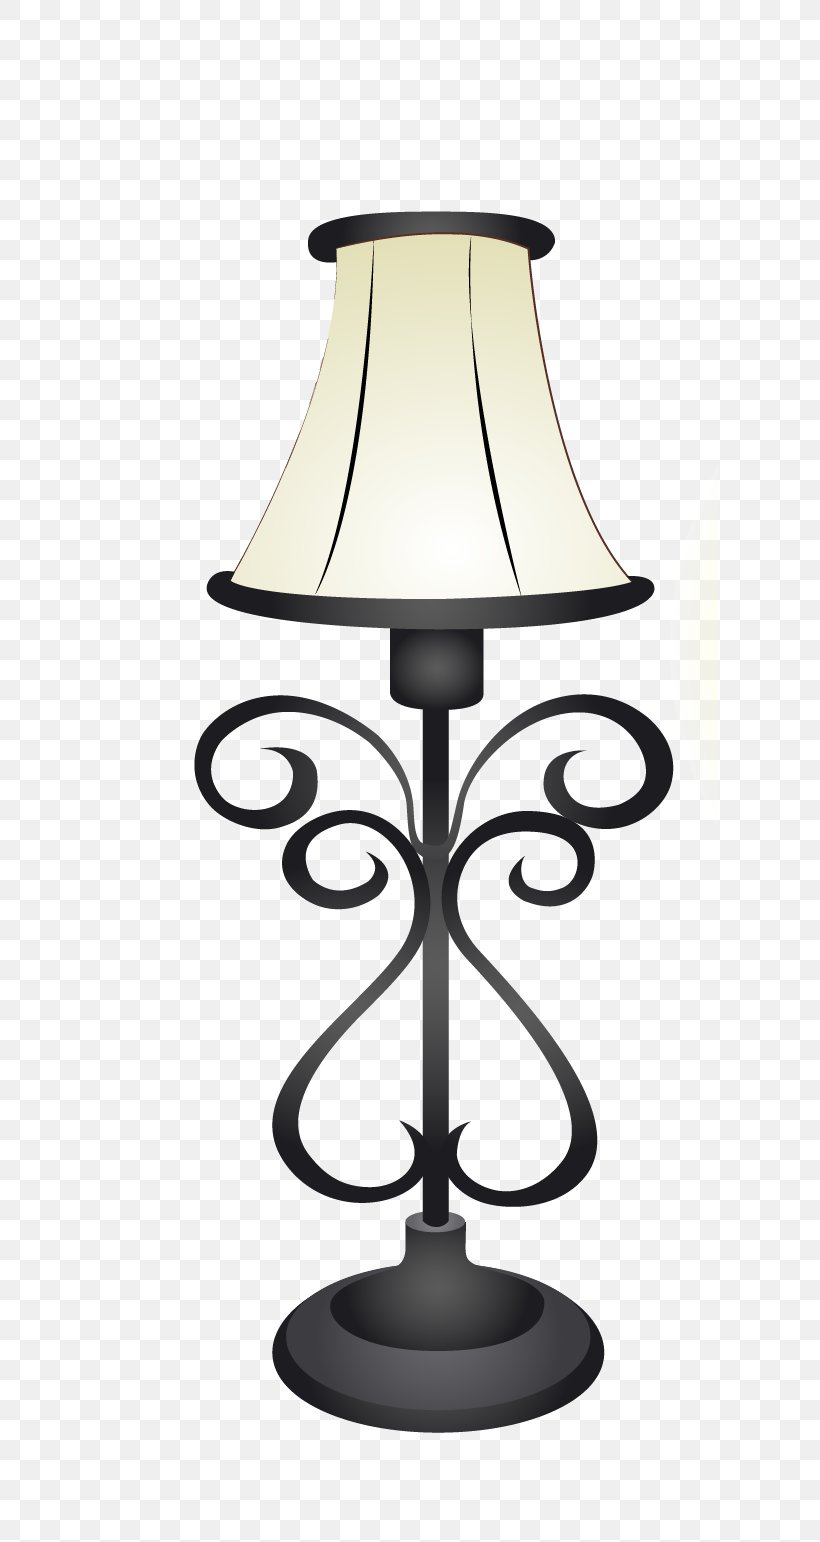 Lamp Drawing PNG X Px Lamp Animation Candle Holder Cartoon Drawing Download Free